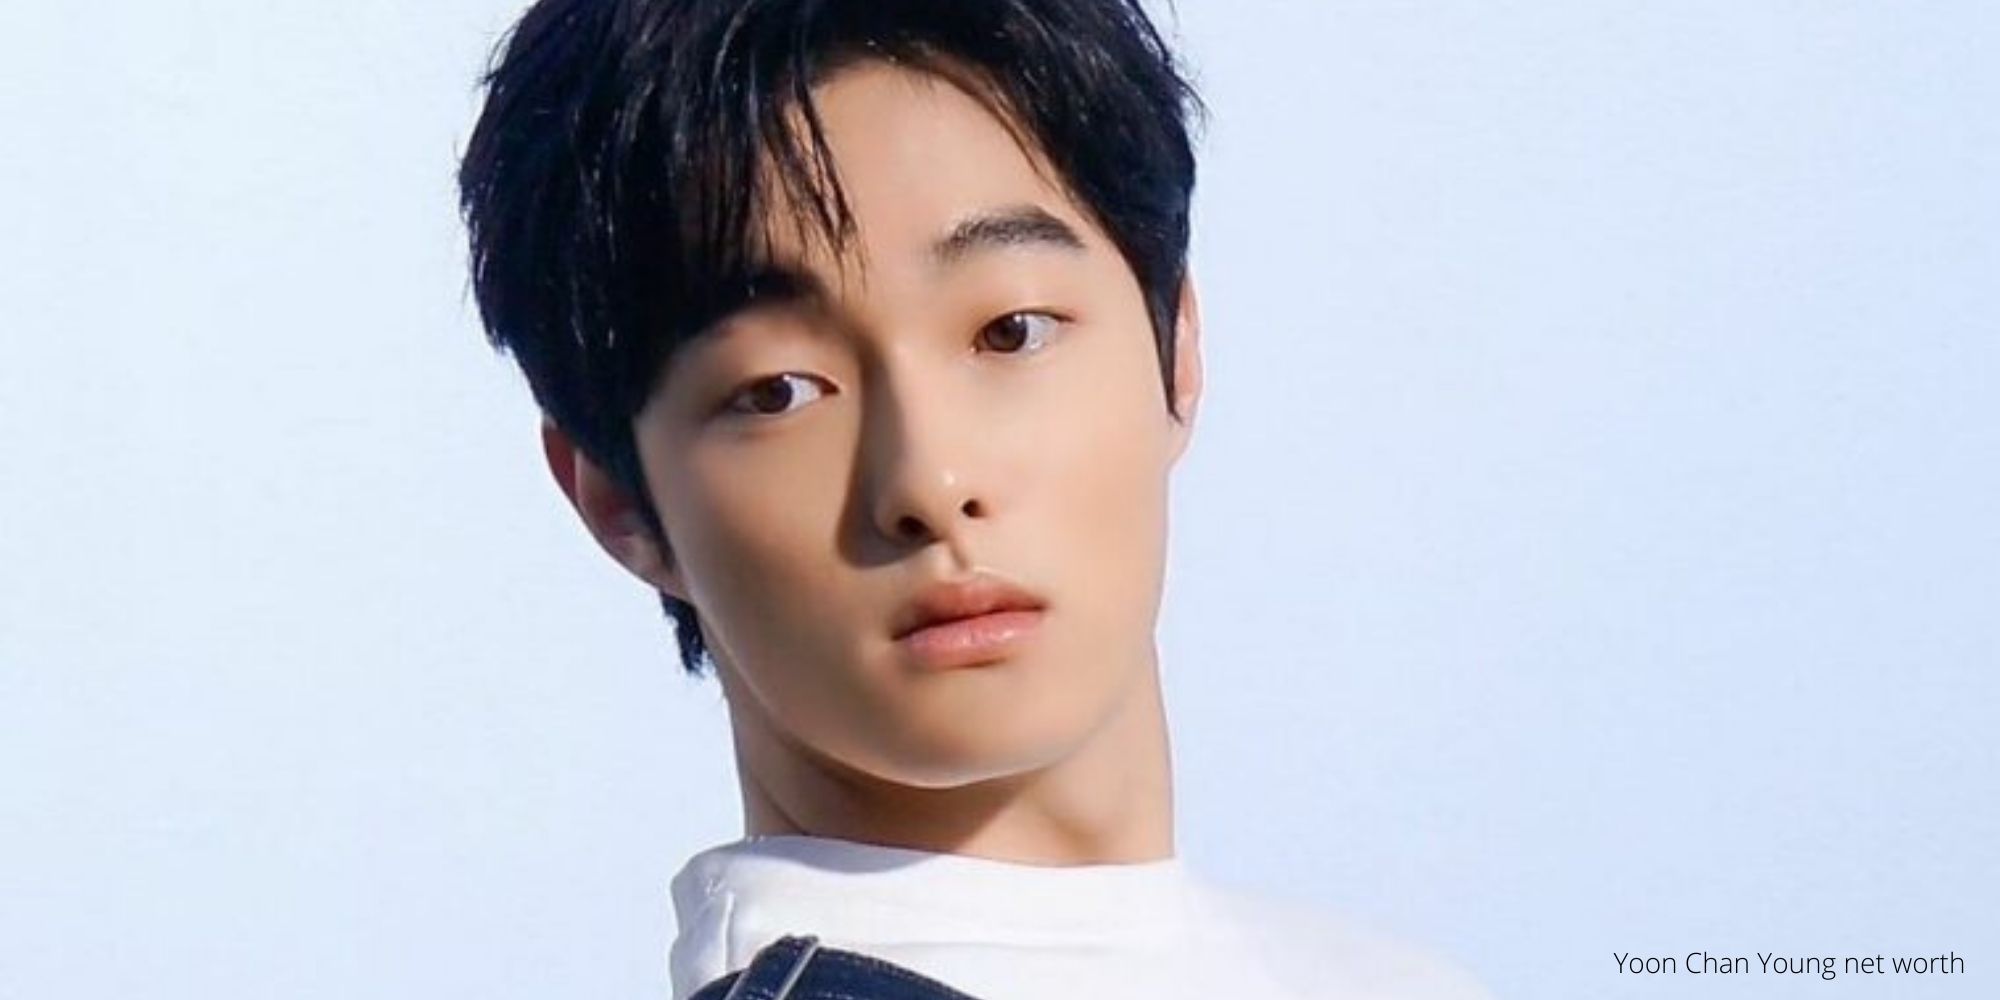 Yoon Chan Young net worth